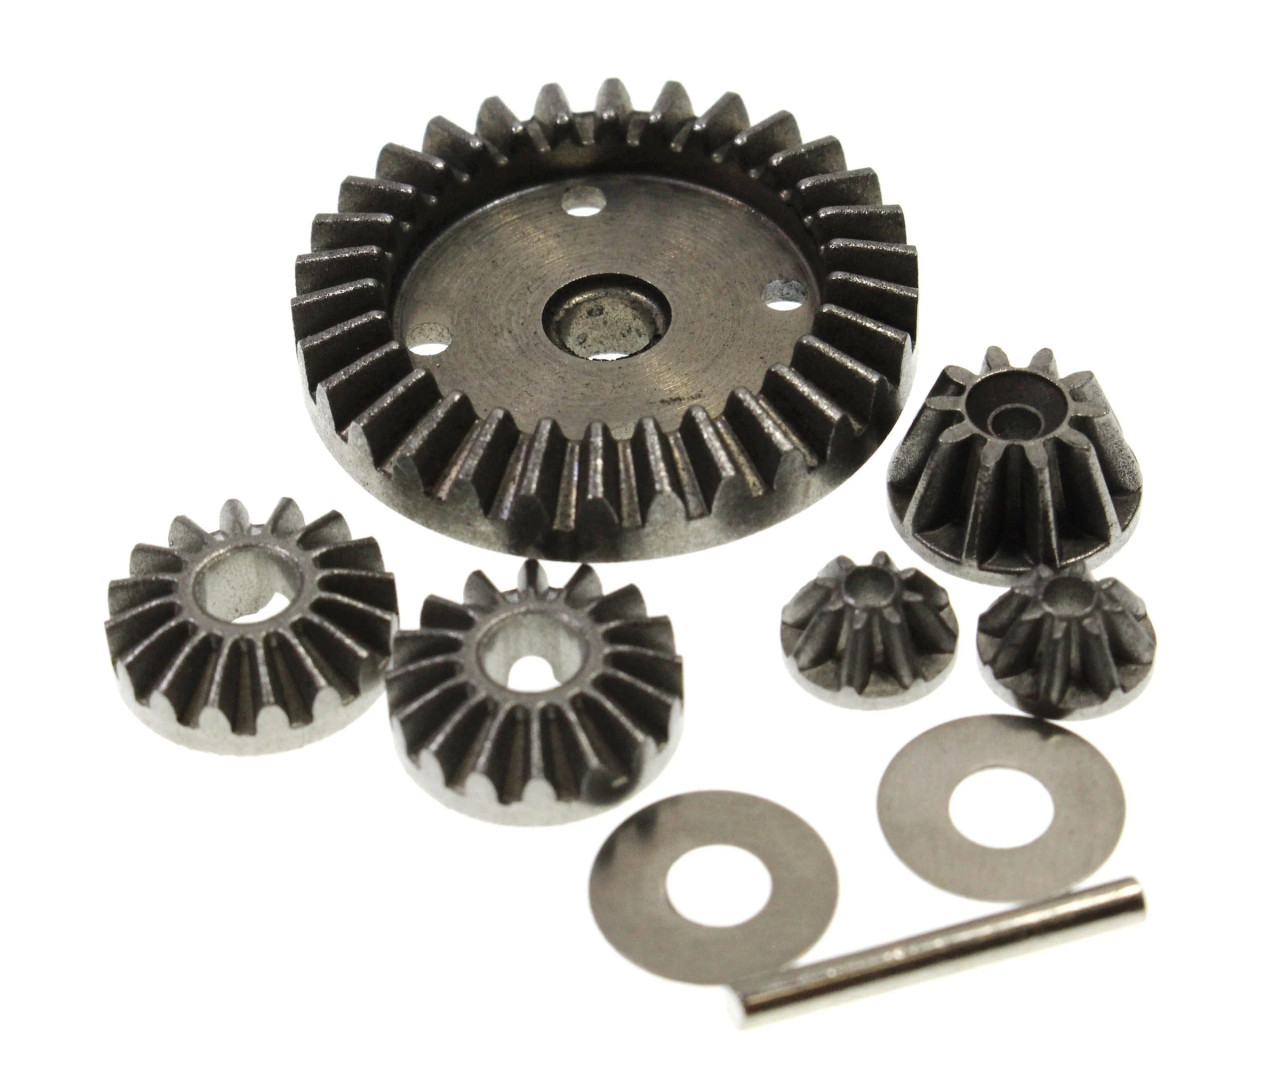 Racers Edge Machined Metal Diff Gears & Diff Pinions & Drive Gear for Blackzon Slyder